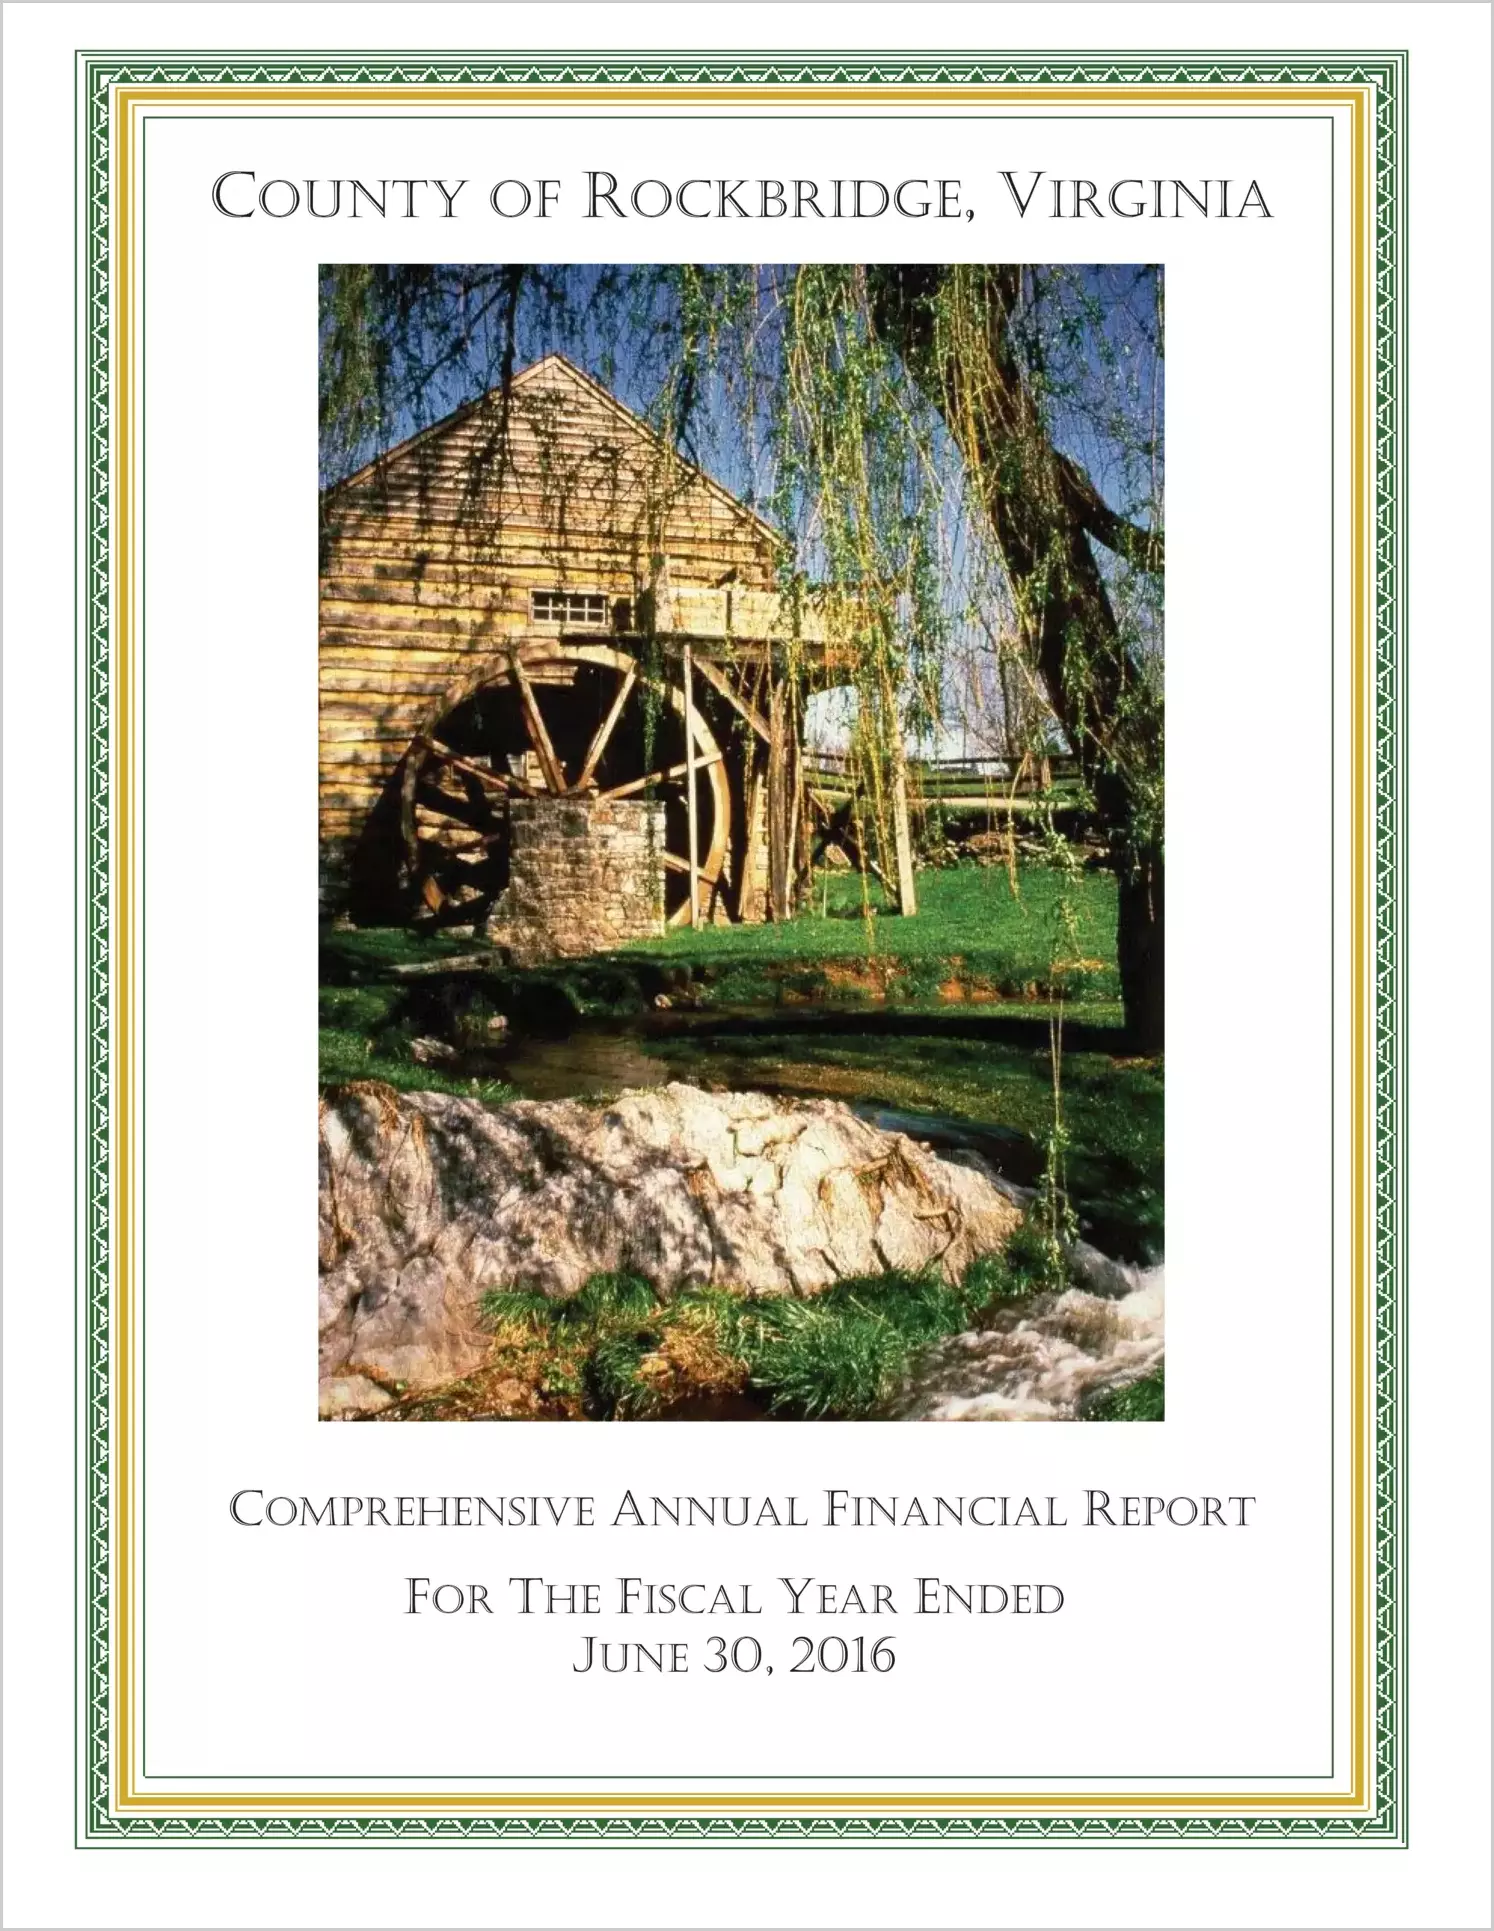 2016 Annual Financial Report for County of Rockbridge